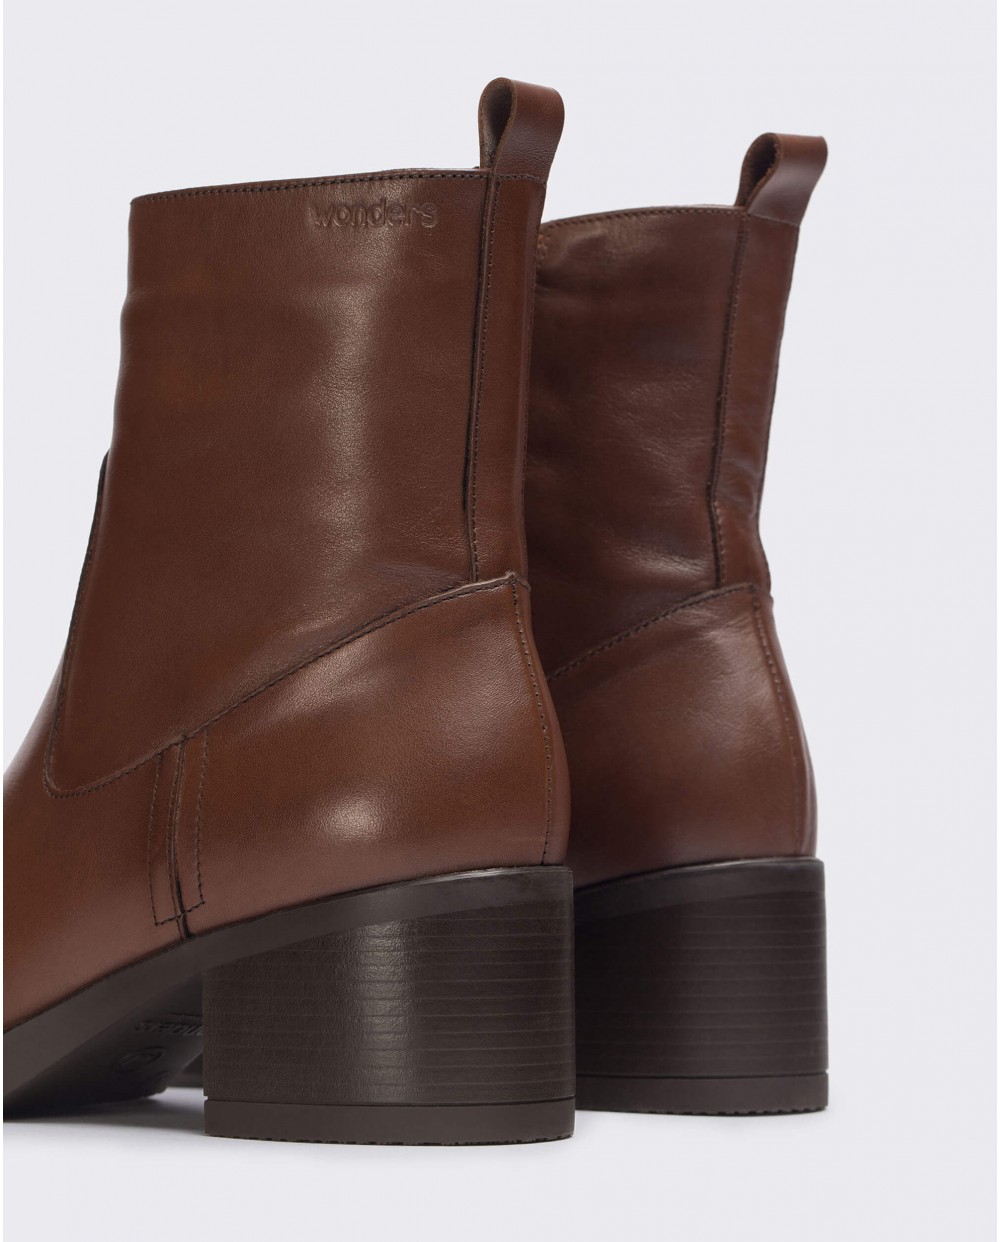 Wonders-Ankle Boots-Spaniel Jeda Ankle Boot